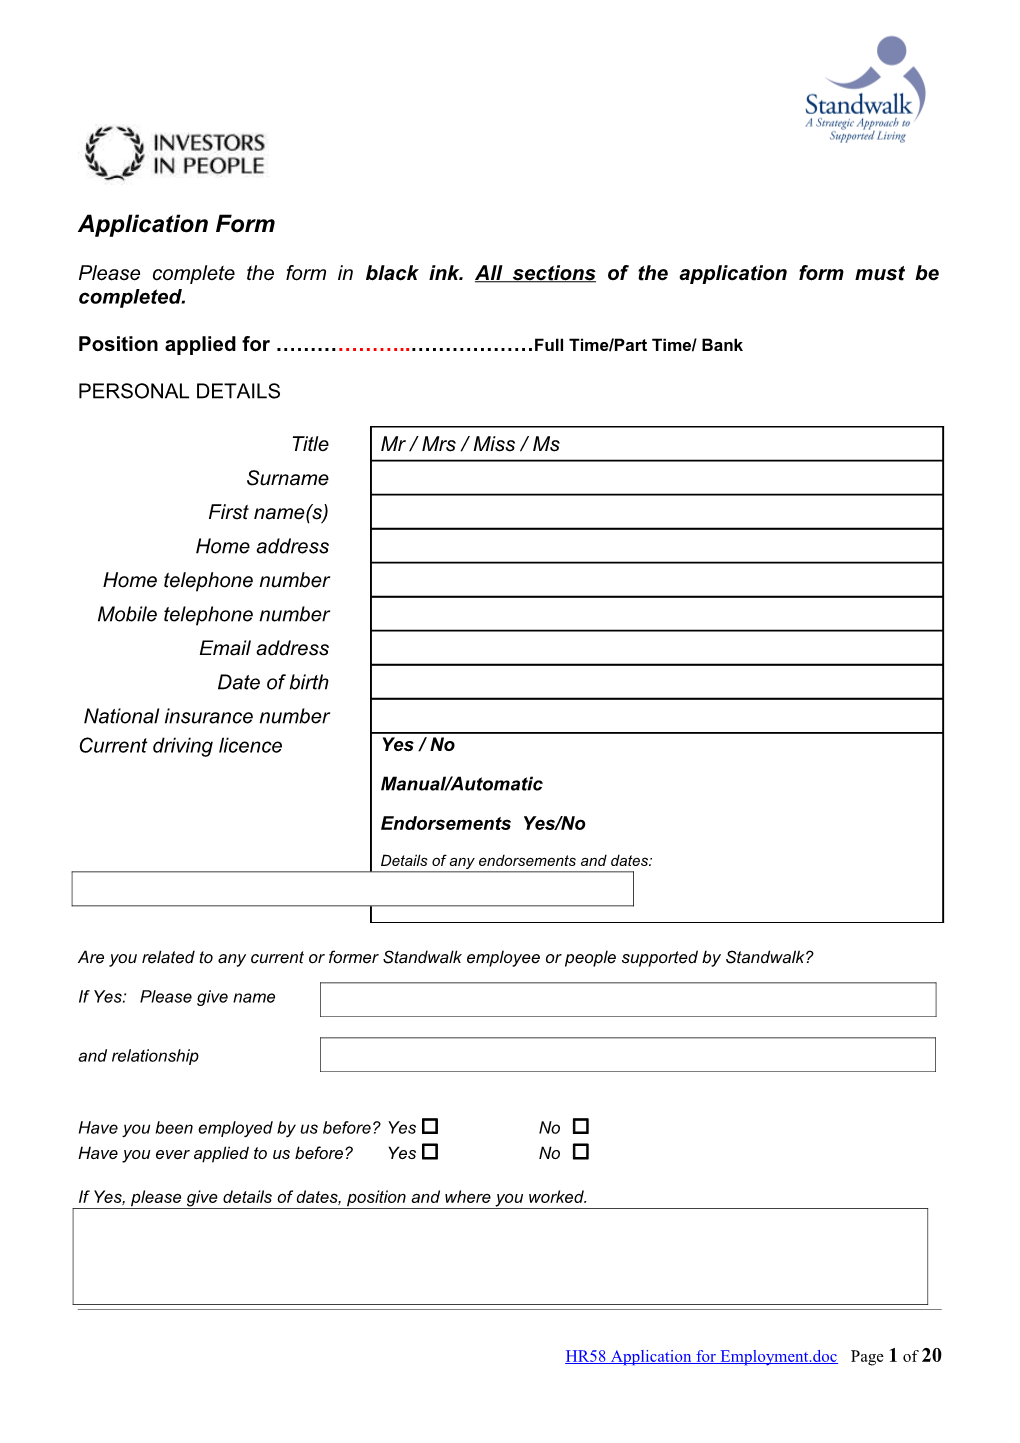 Please Complete the Form in Black Ink.All Sections of the Application Form Must Be Completed